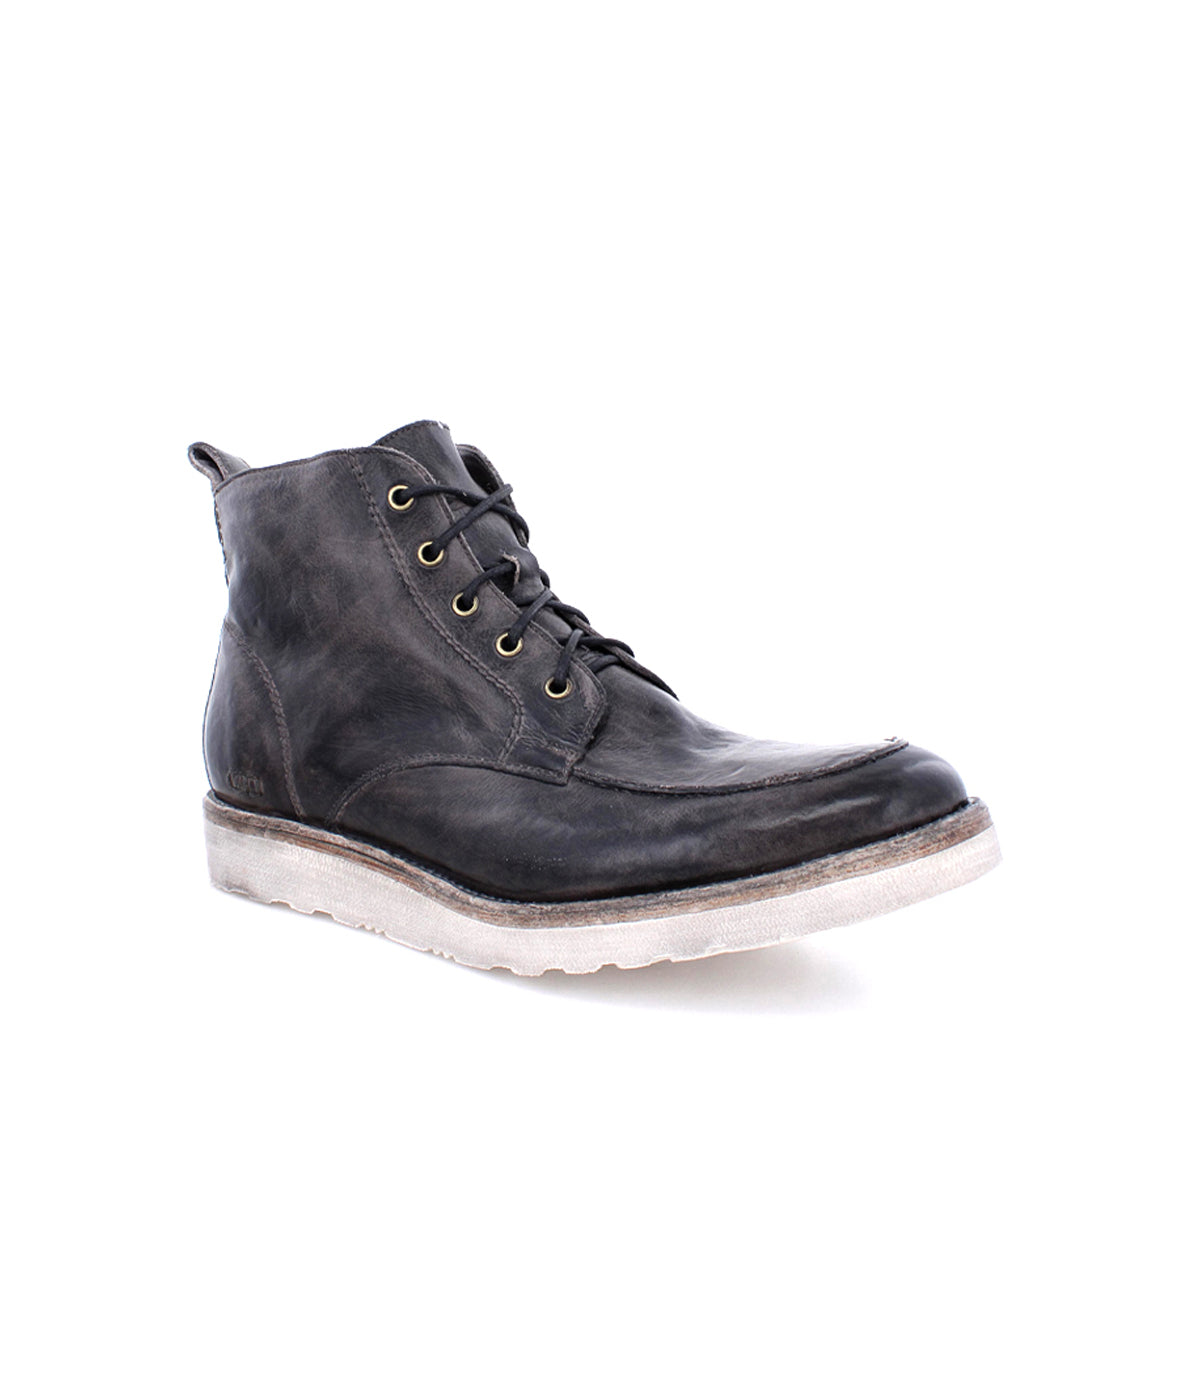 A men's Lincoln black leather boot with laces and a white sole by Bed Stu.